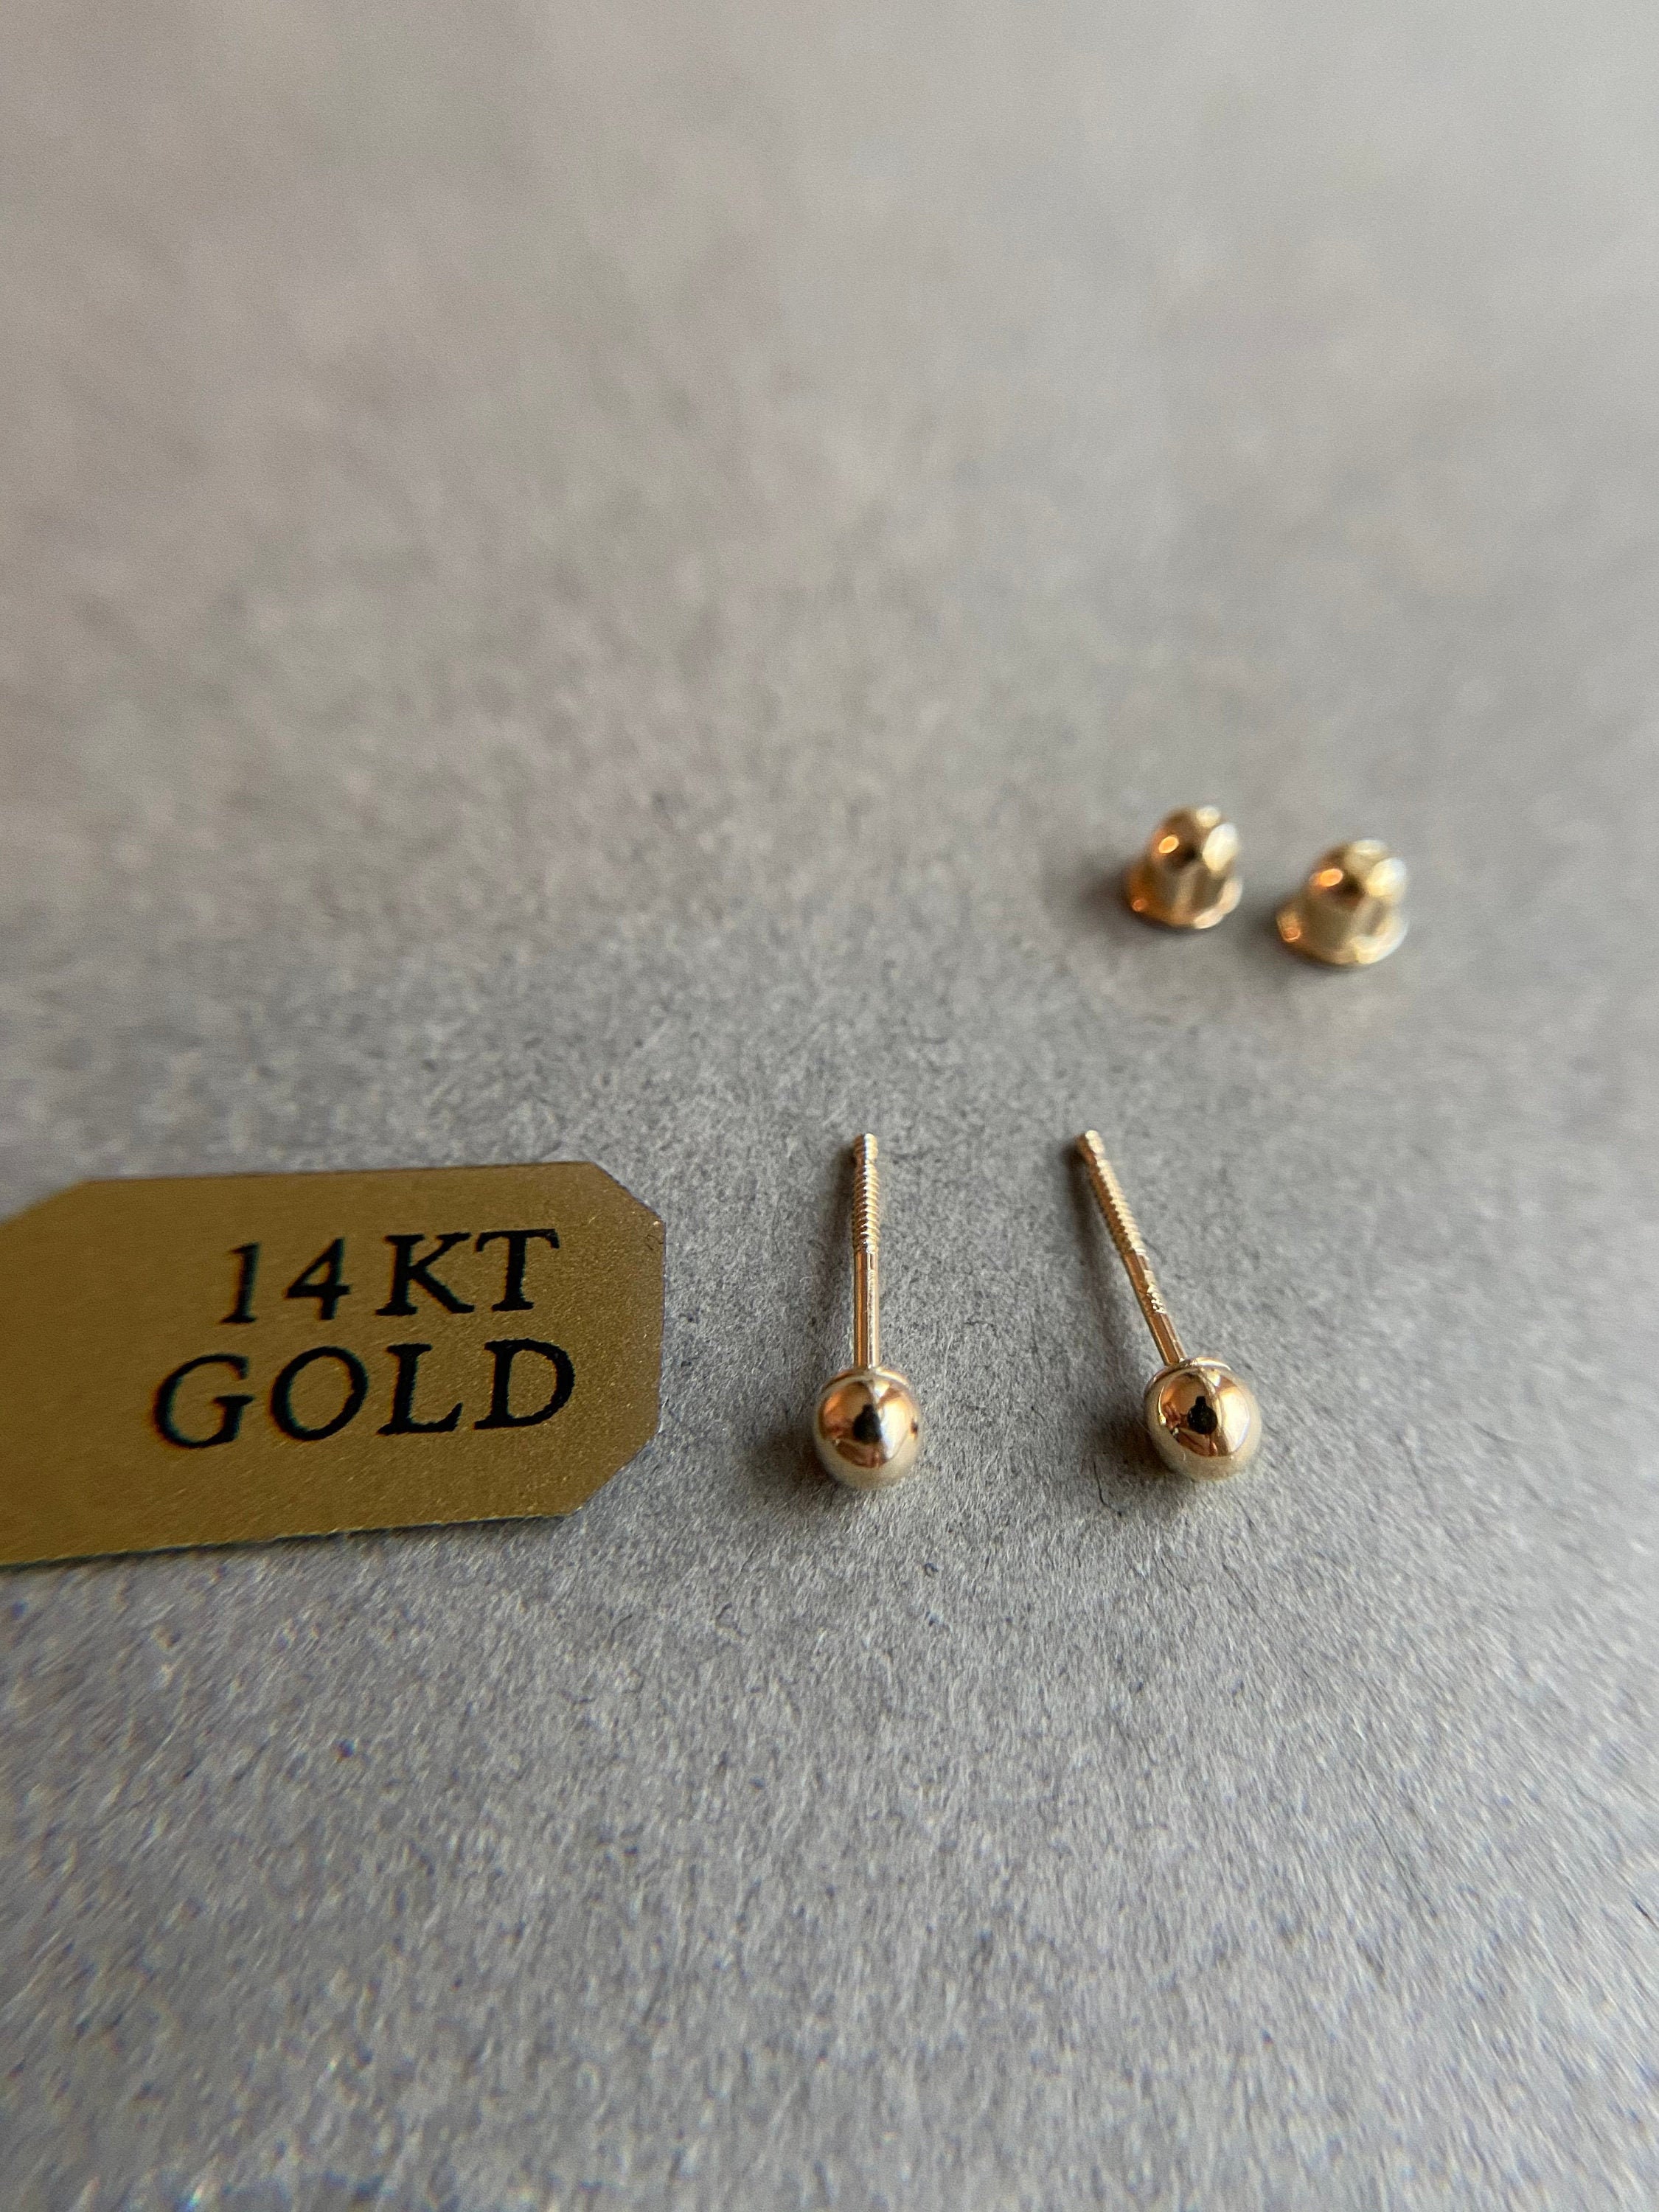 14k Yellow Gold Screw Back Earrings with Ball & Ring